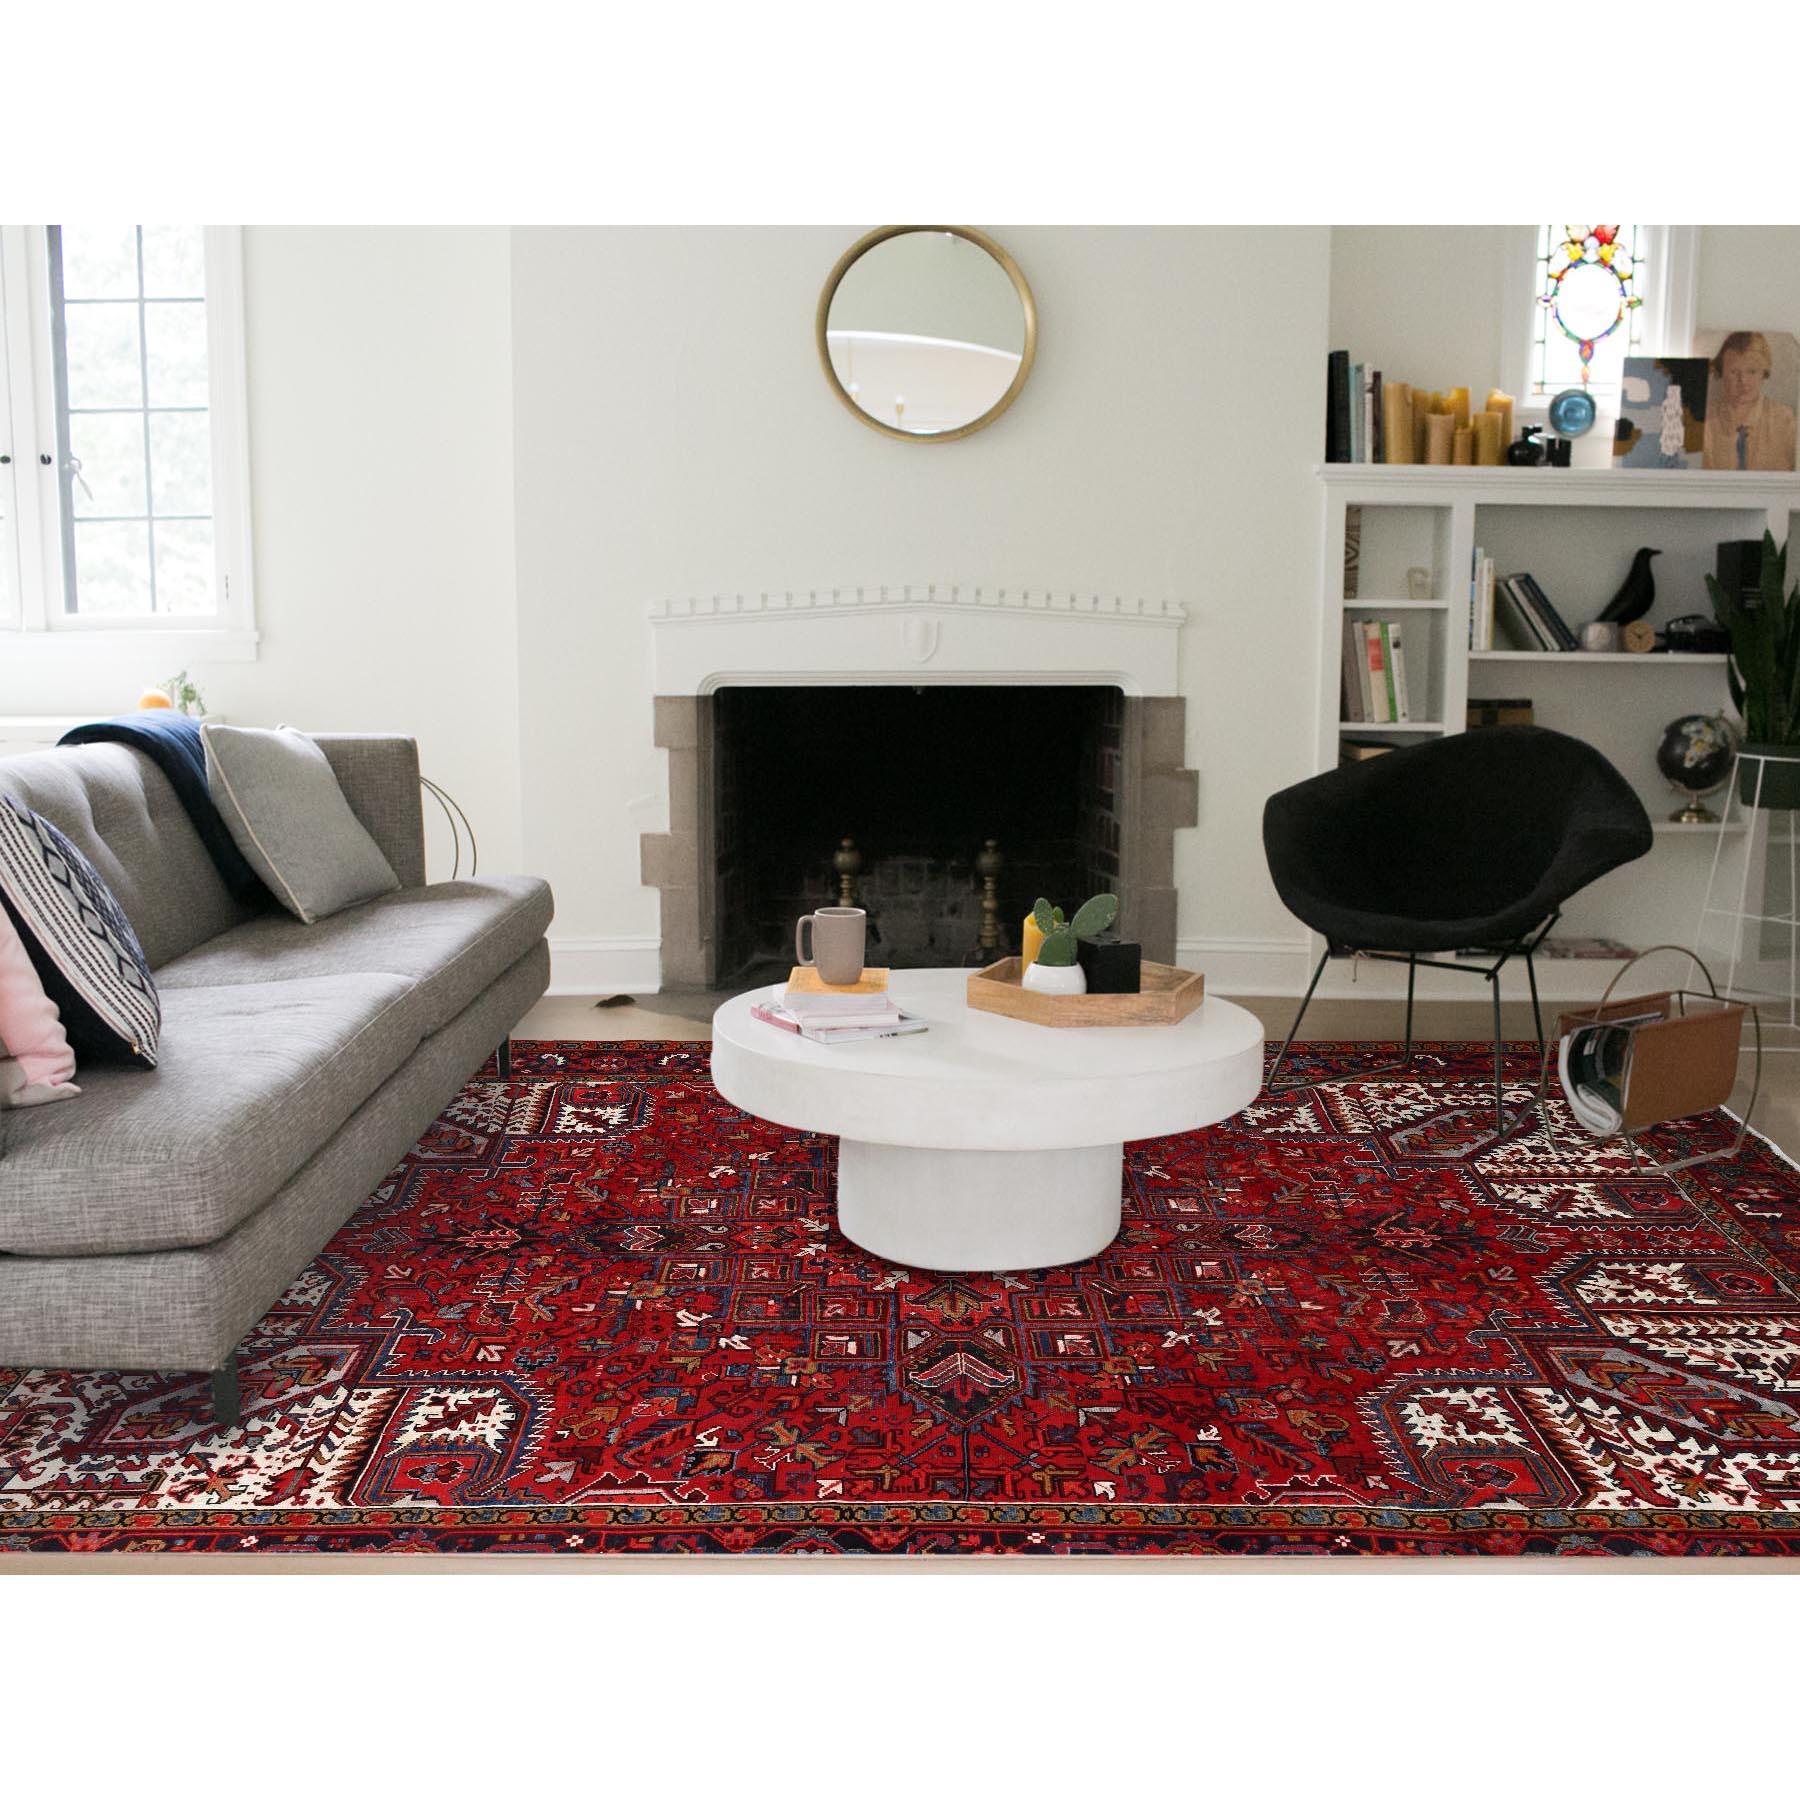 This fabulous Hand-Knotted carpet has been created and designed for extra strength and durability. This rug has been handcrafted for weeks in the traditional method that is used to make
Exact Rug Size in Feet and Inches : 8'0